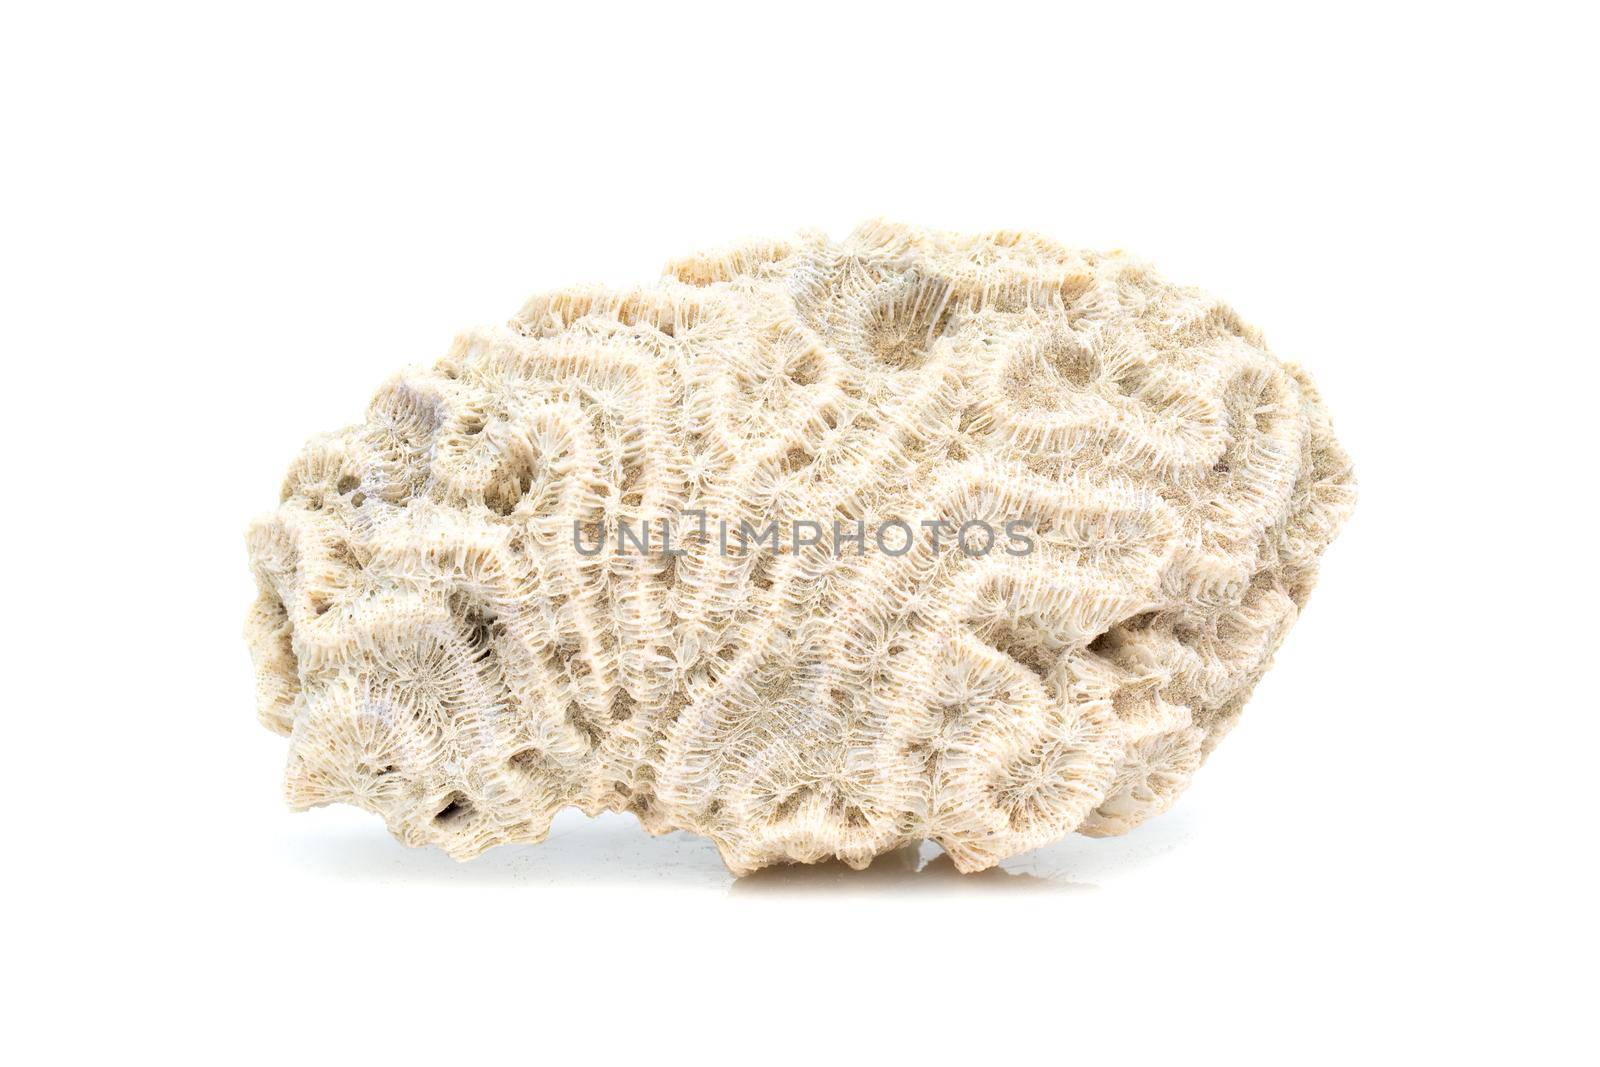 Image of coral cubes on a white background. Undersea Animals. by yod67